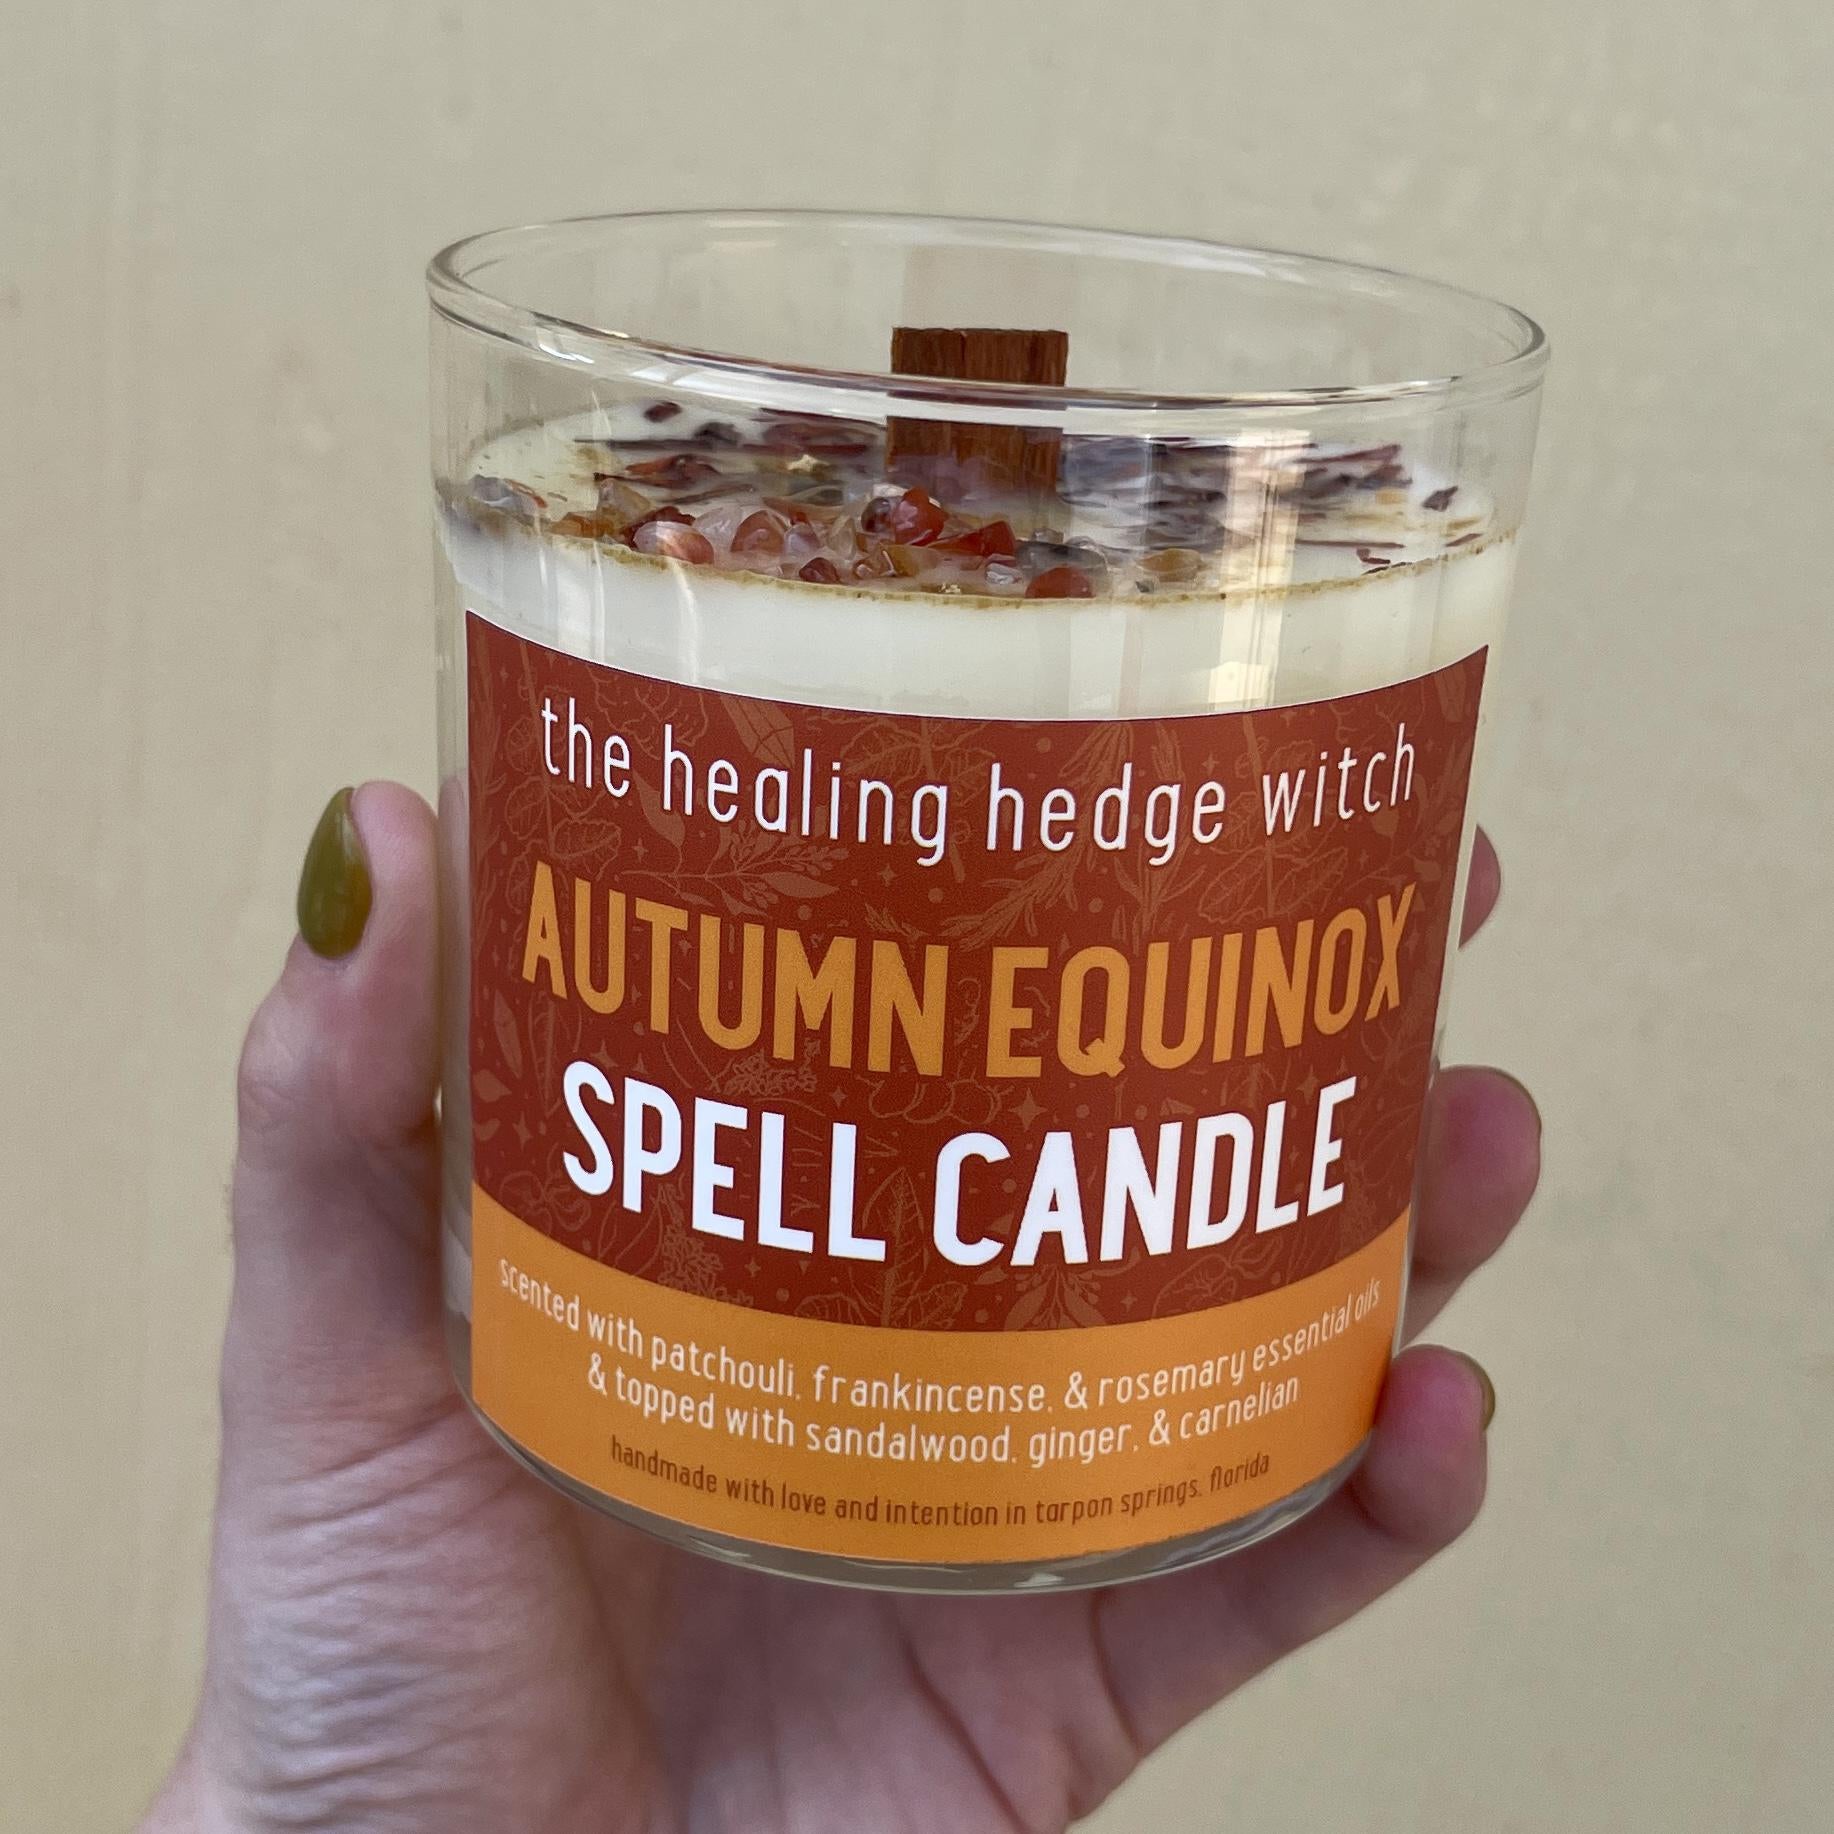 8 ounce autumn equinox spell candle scented with patchouli, frankicense, and rosemary essential oils and topped with sandwood, ginger, and carnelian.